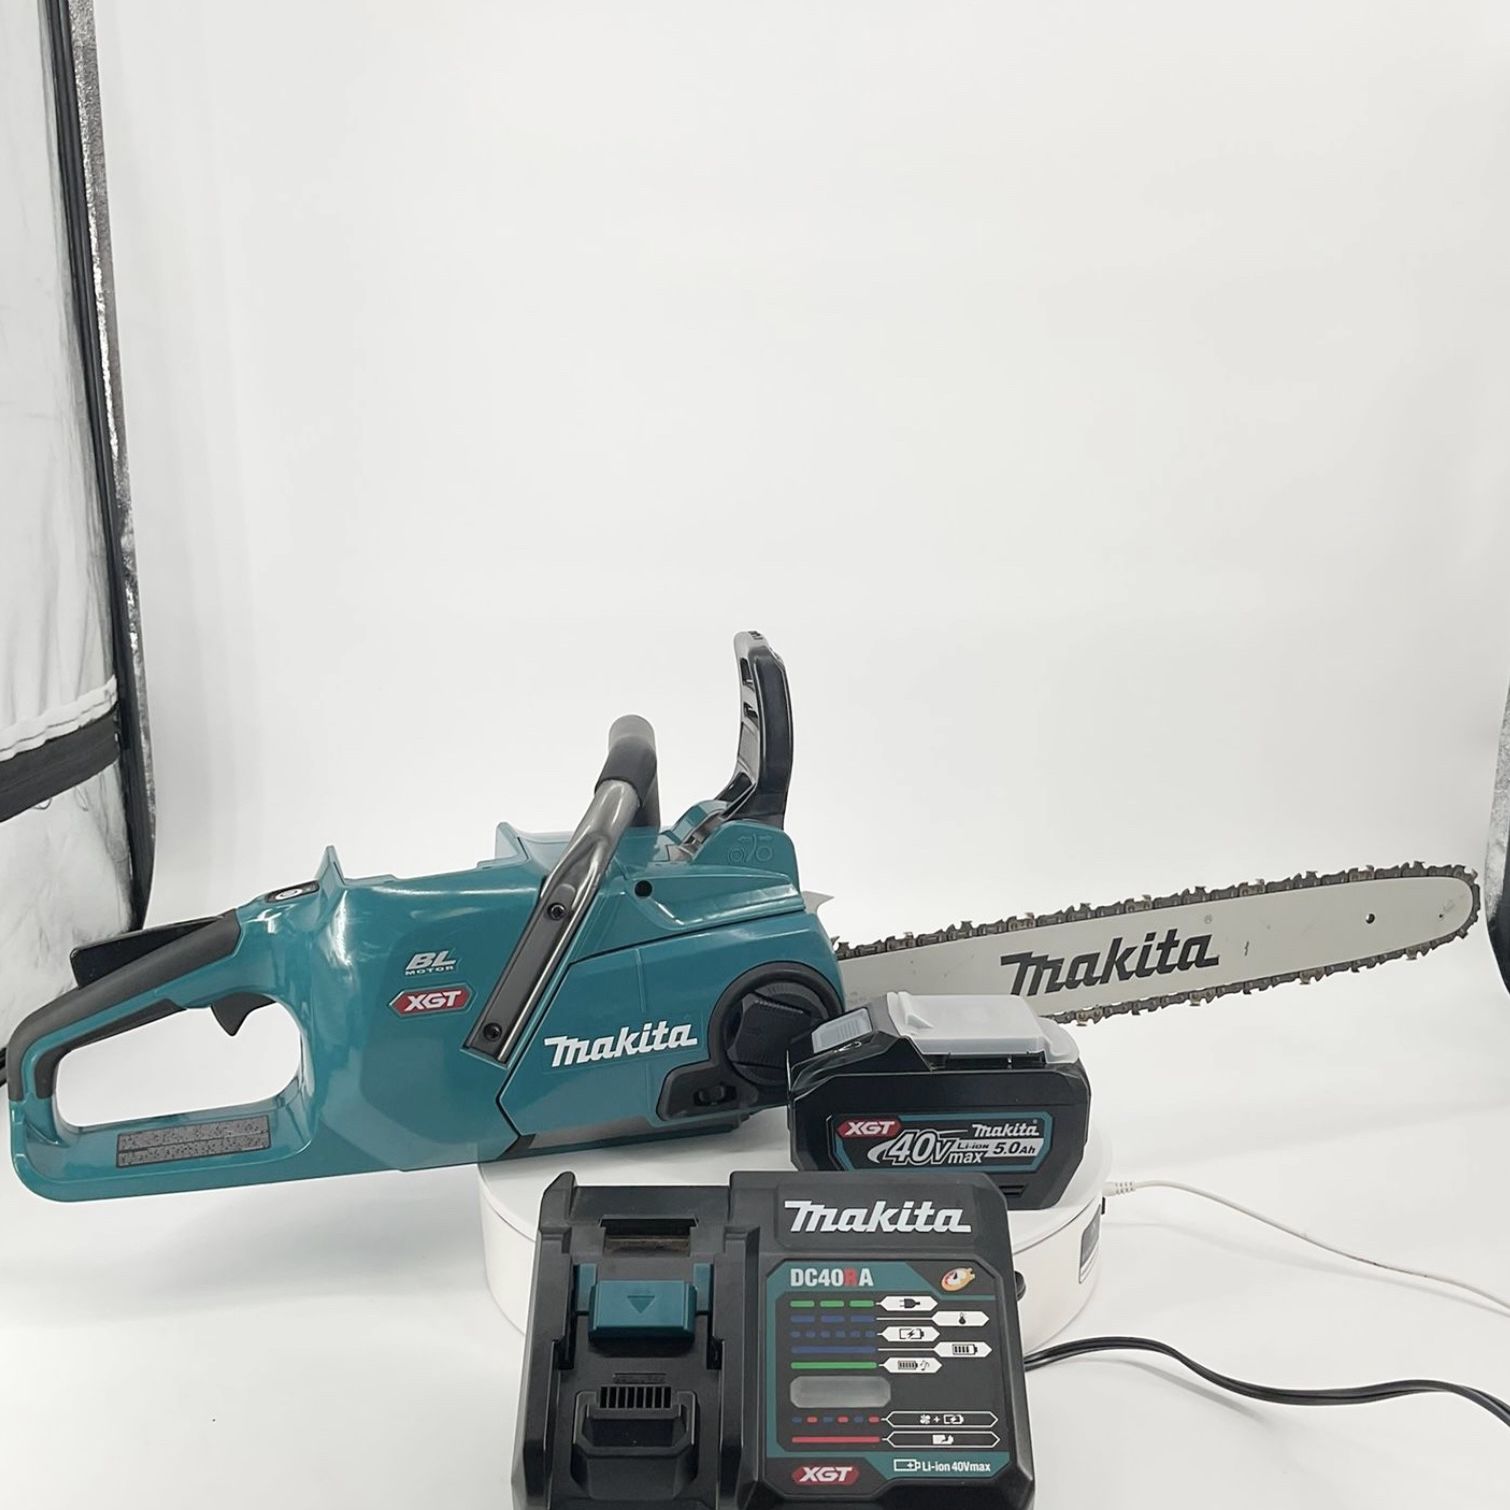 Makita XGT 18 in. 40V max Brushless Electric Cordless Battery Chainsaw Kit (5.0Ah) [USED LIKE NEW] 